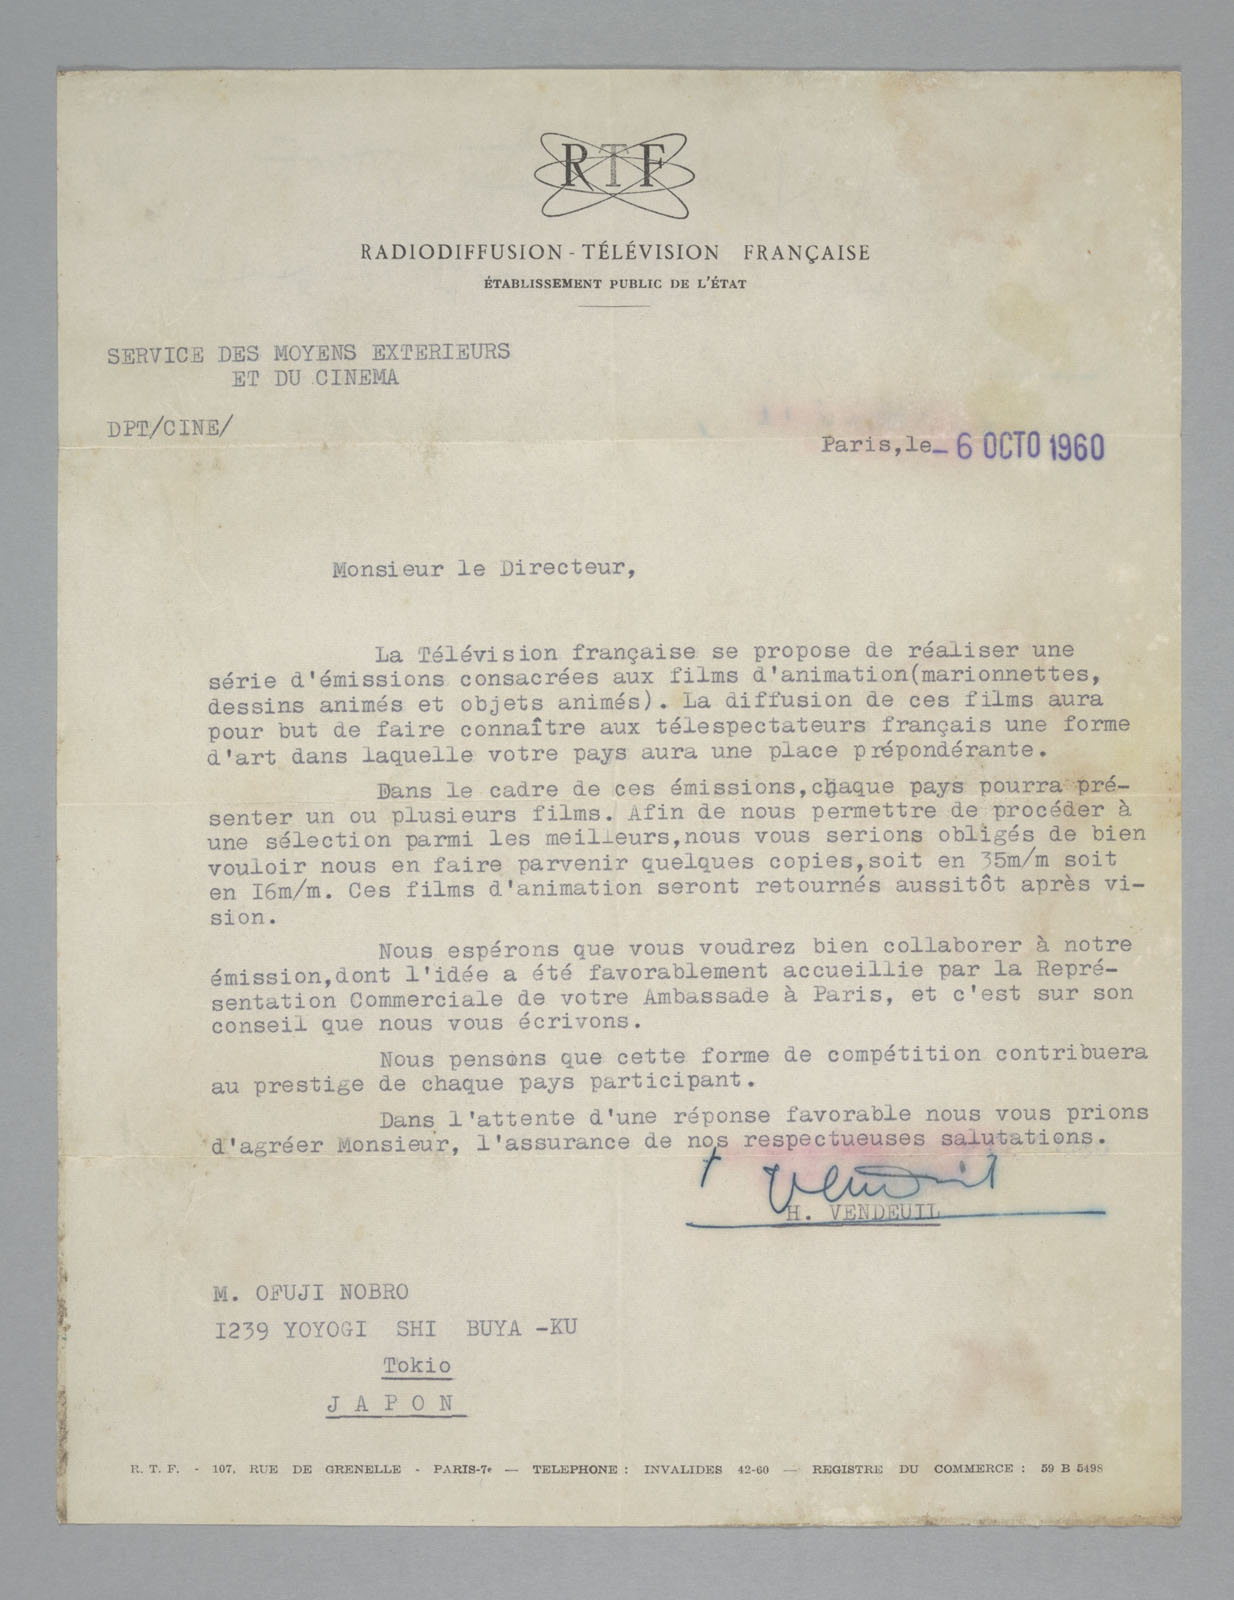 A letter of  request from the French public national television broadcaster (1960)